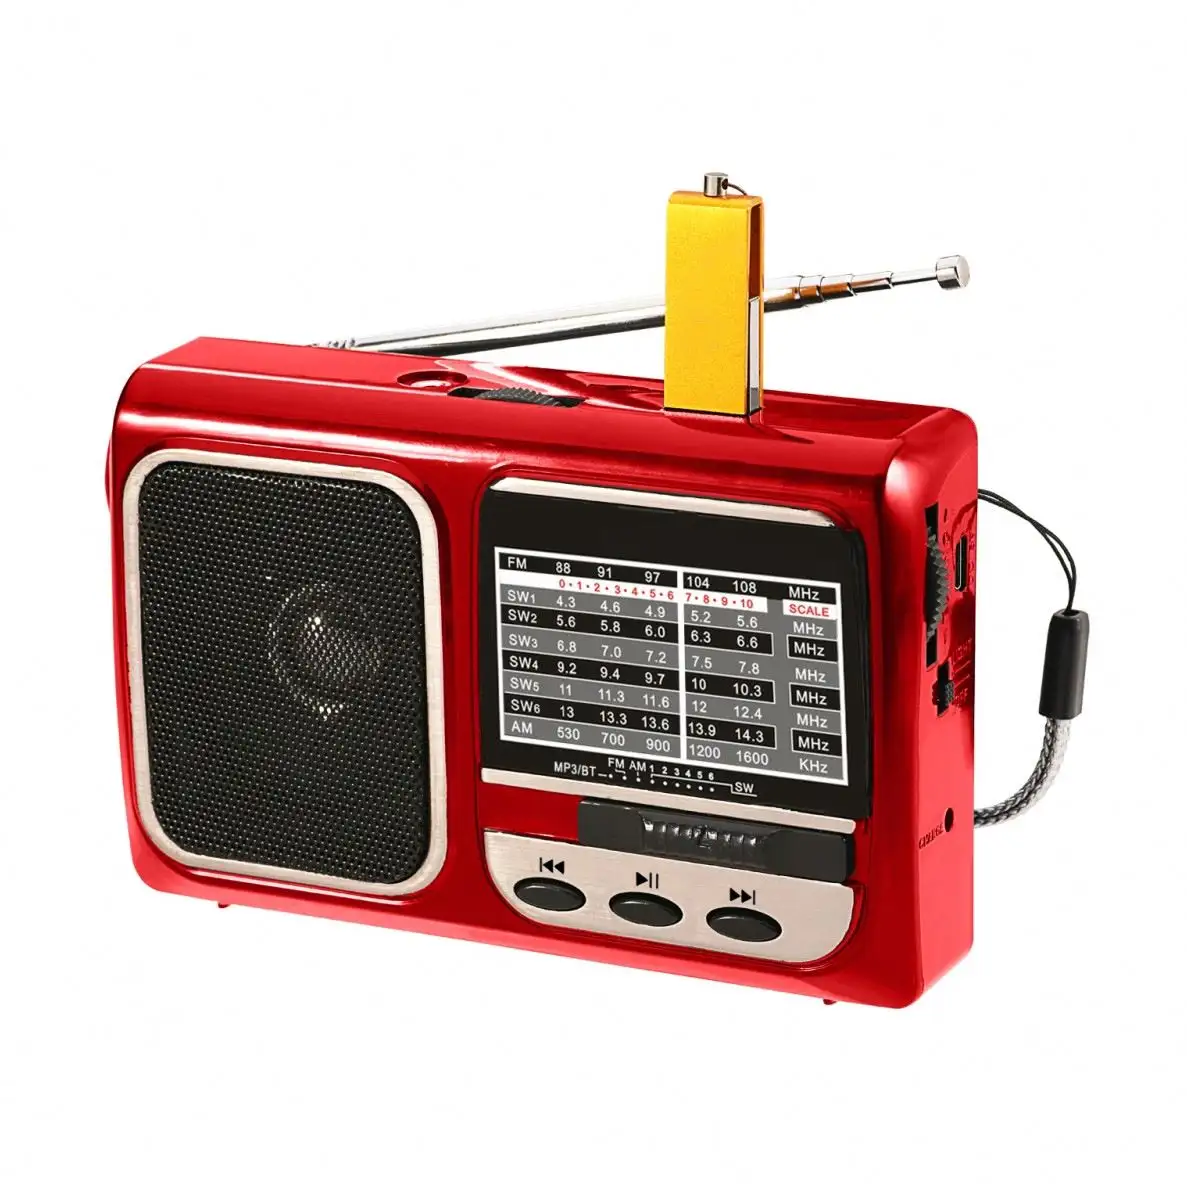 RS-1519 High Quality Am Fm Portable Radio Gift with bass speaker rechargeable battery solar panel earphone jack R-1519